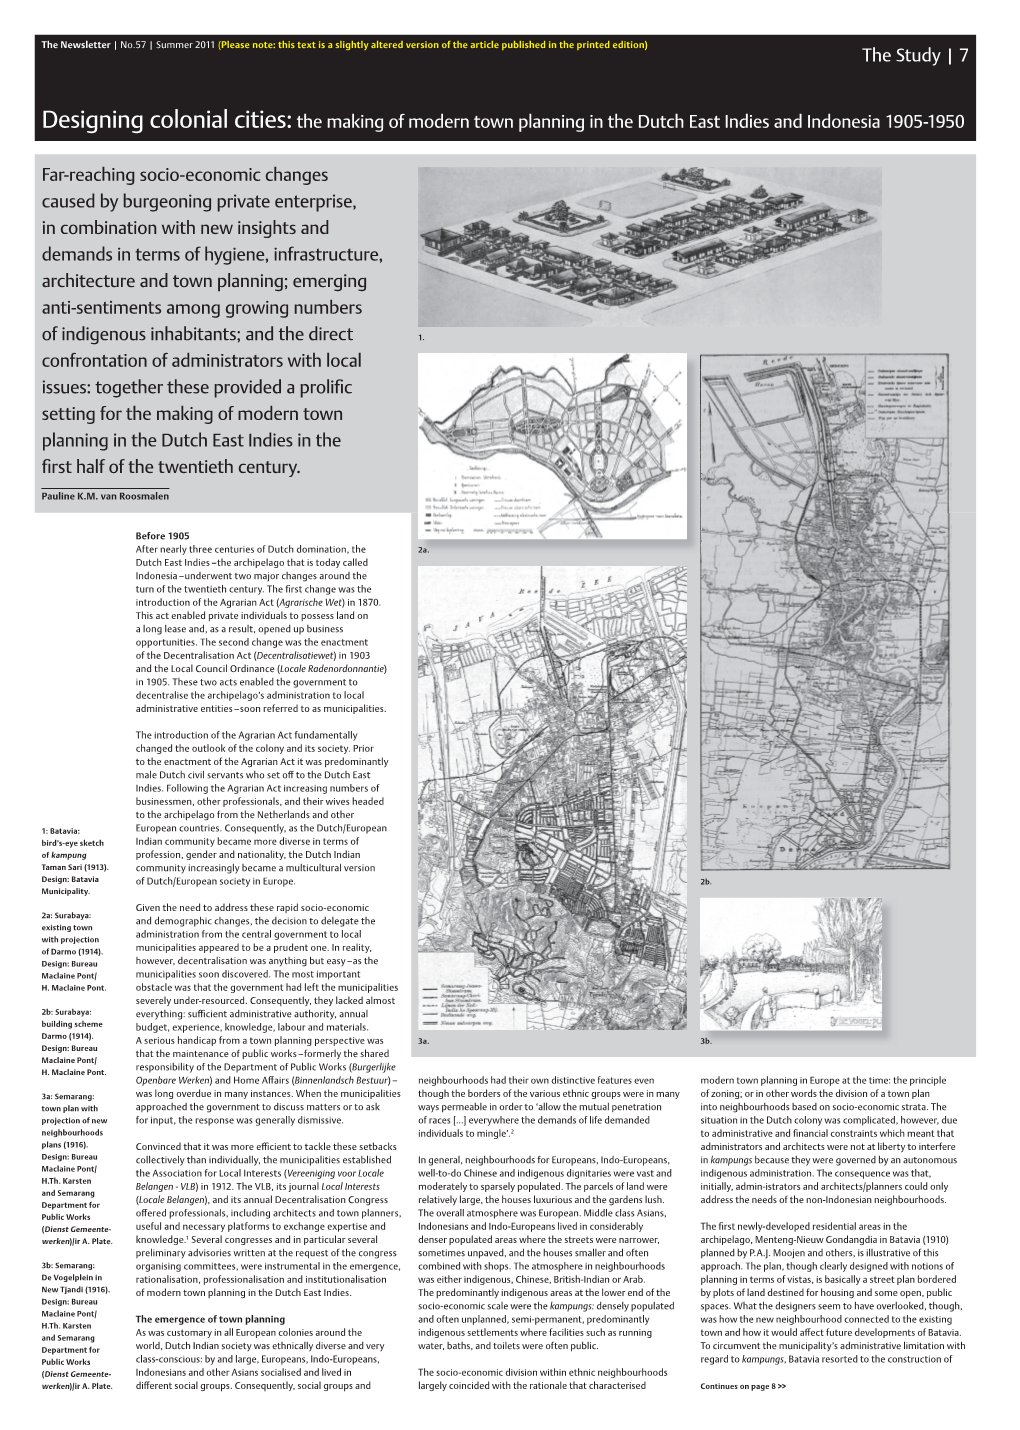 Designing Colonial Cities:The Making of Modern Town Planning in the Dutch